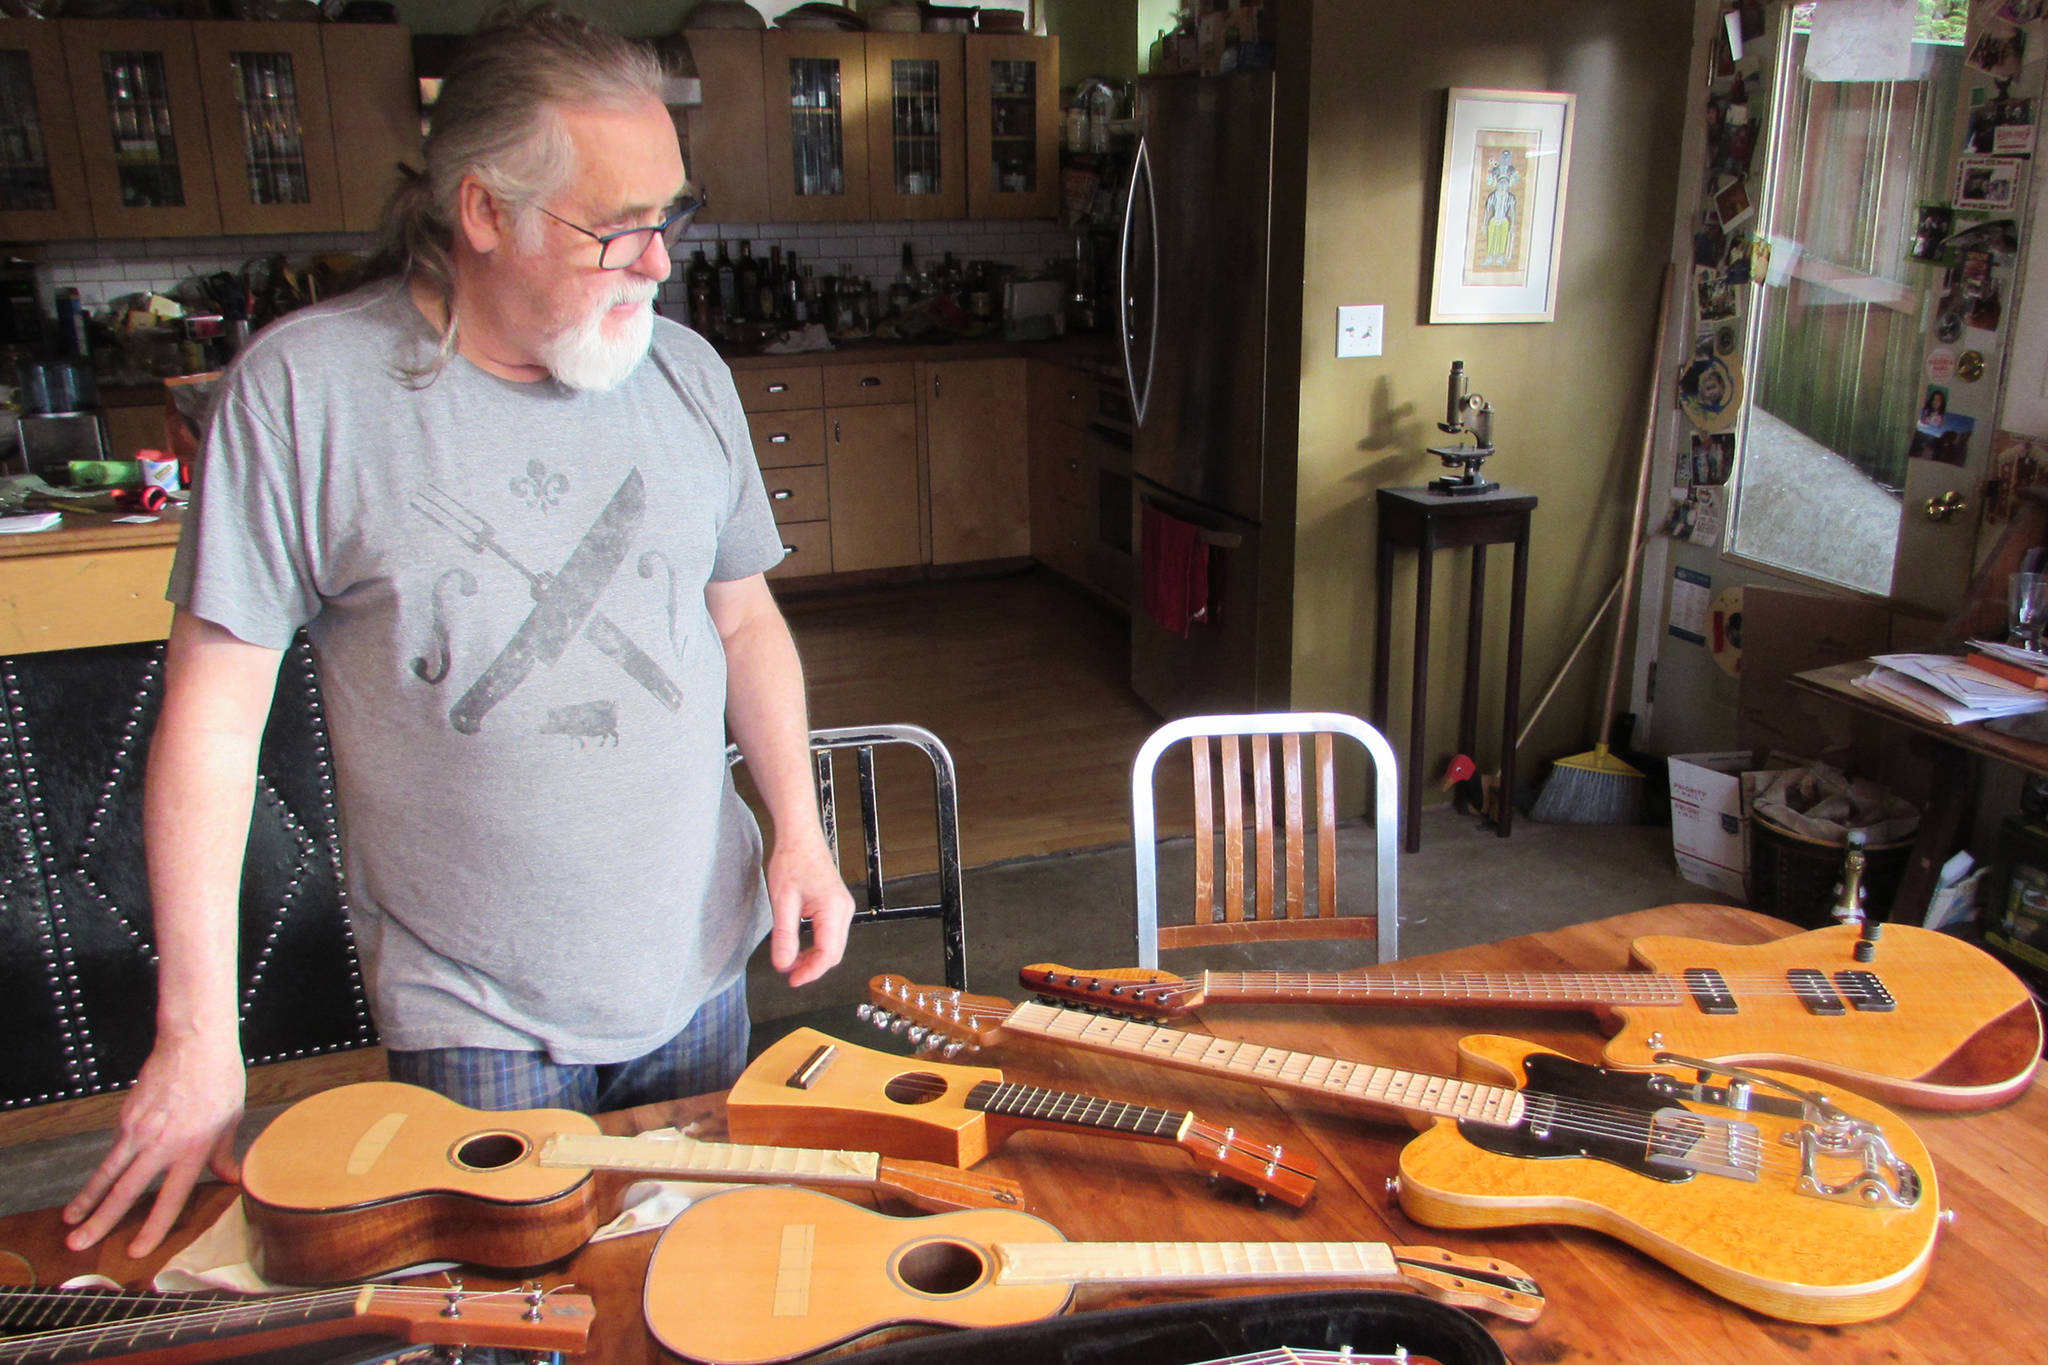 Paul Gardinier looks at a fleet of stringed instruments he’s made over the better part of the past decade at his home in Juneau on Nov. 16, 2018.(Ben Hohenstatt | Capital City Weekly)